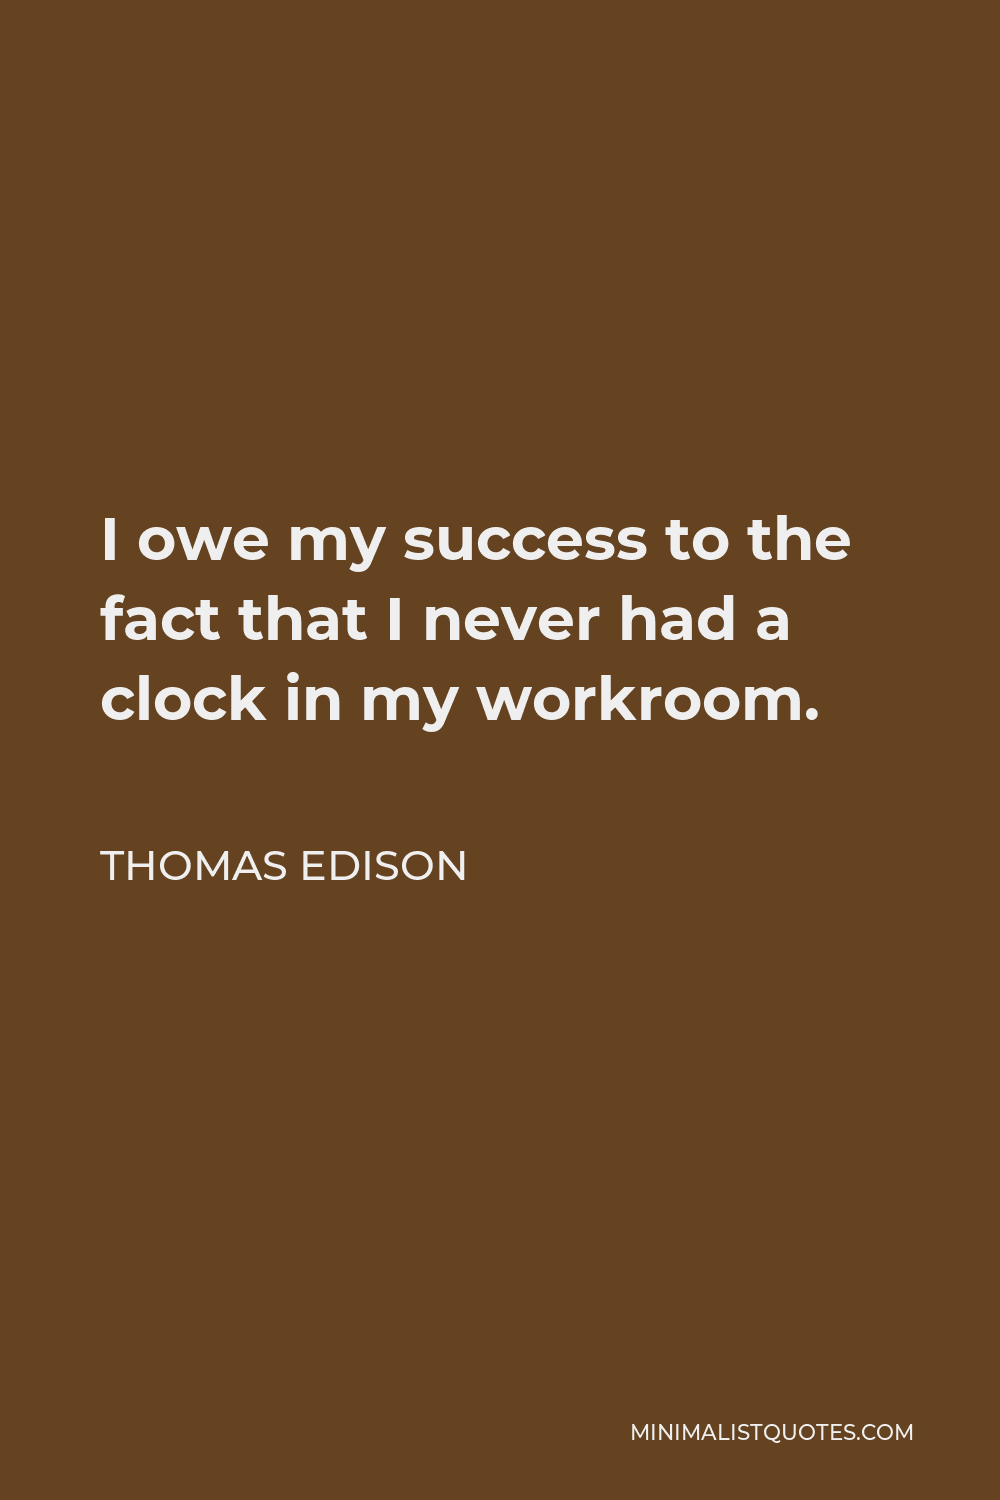 Thomas Edison Quote - I owe my success to the fact that I never had a clock in my workroom.